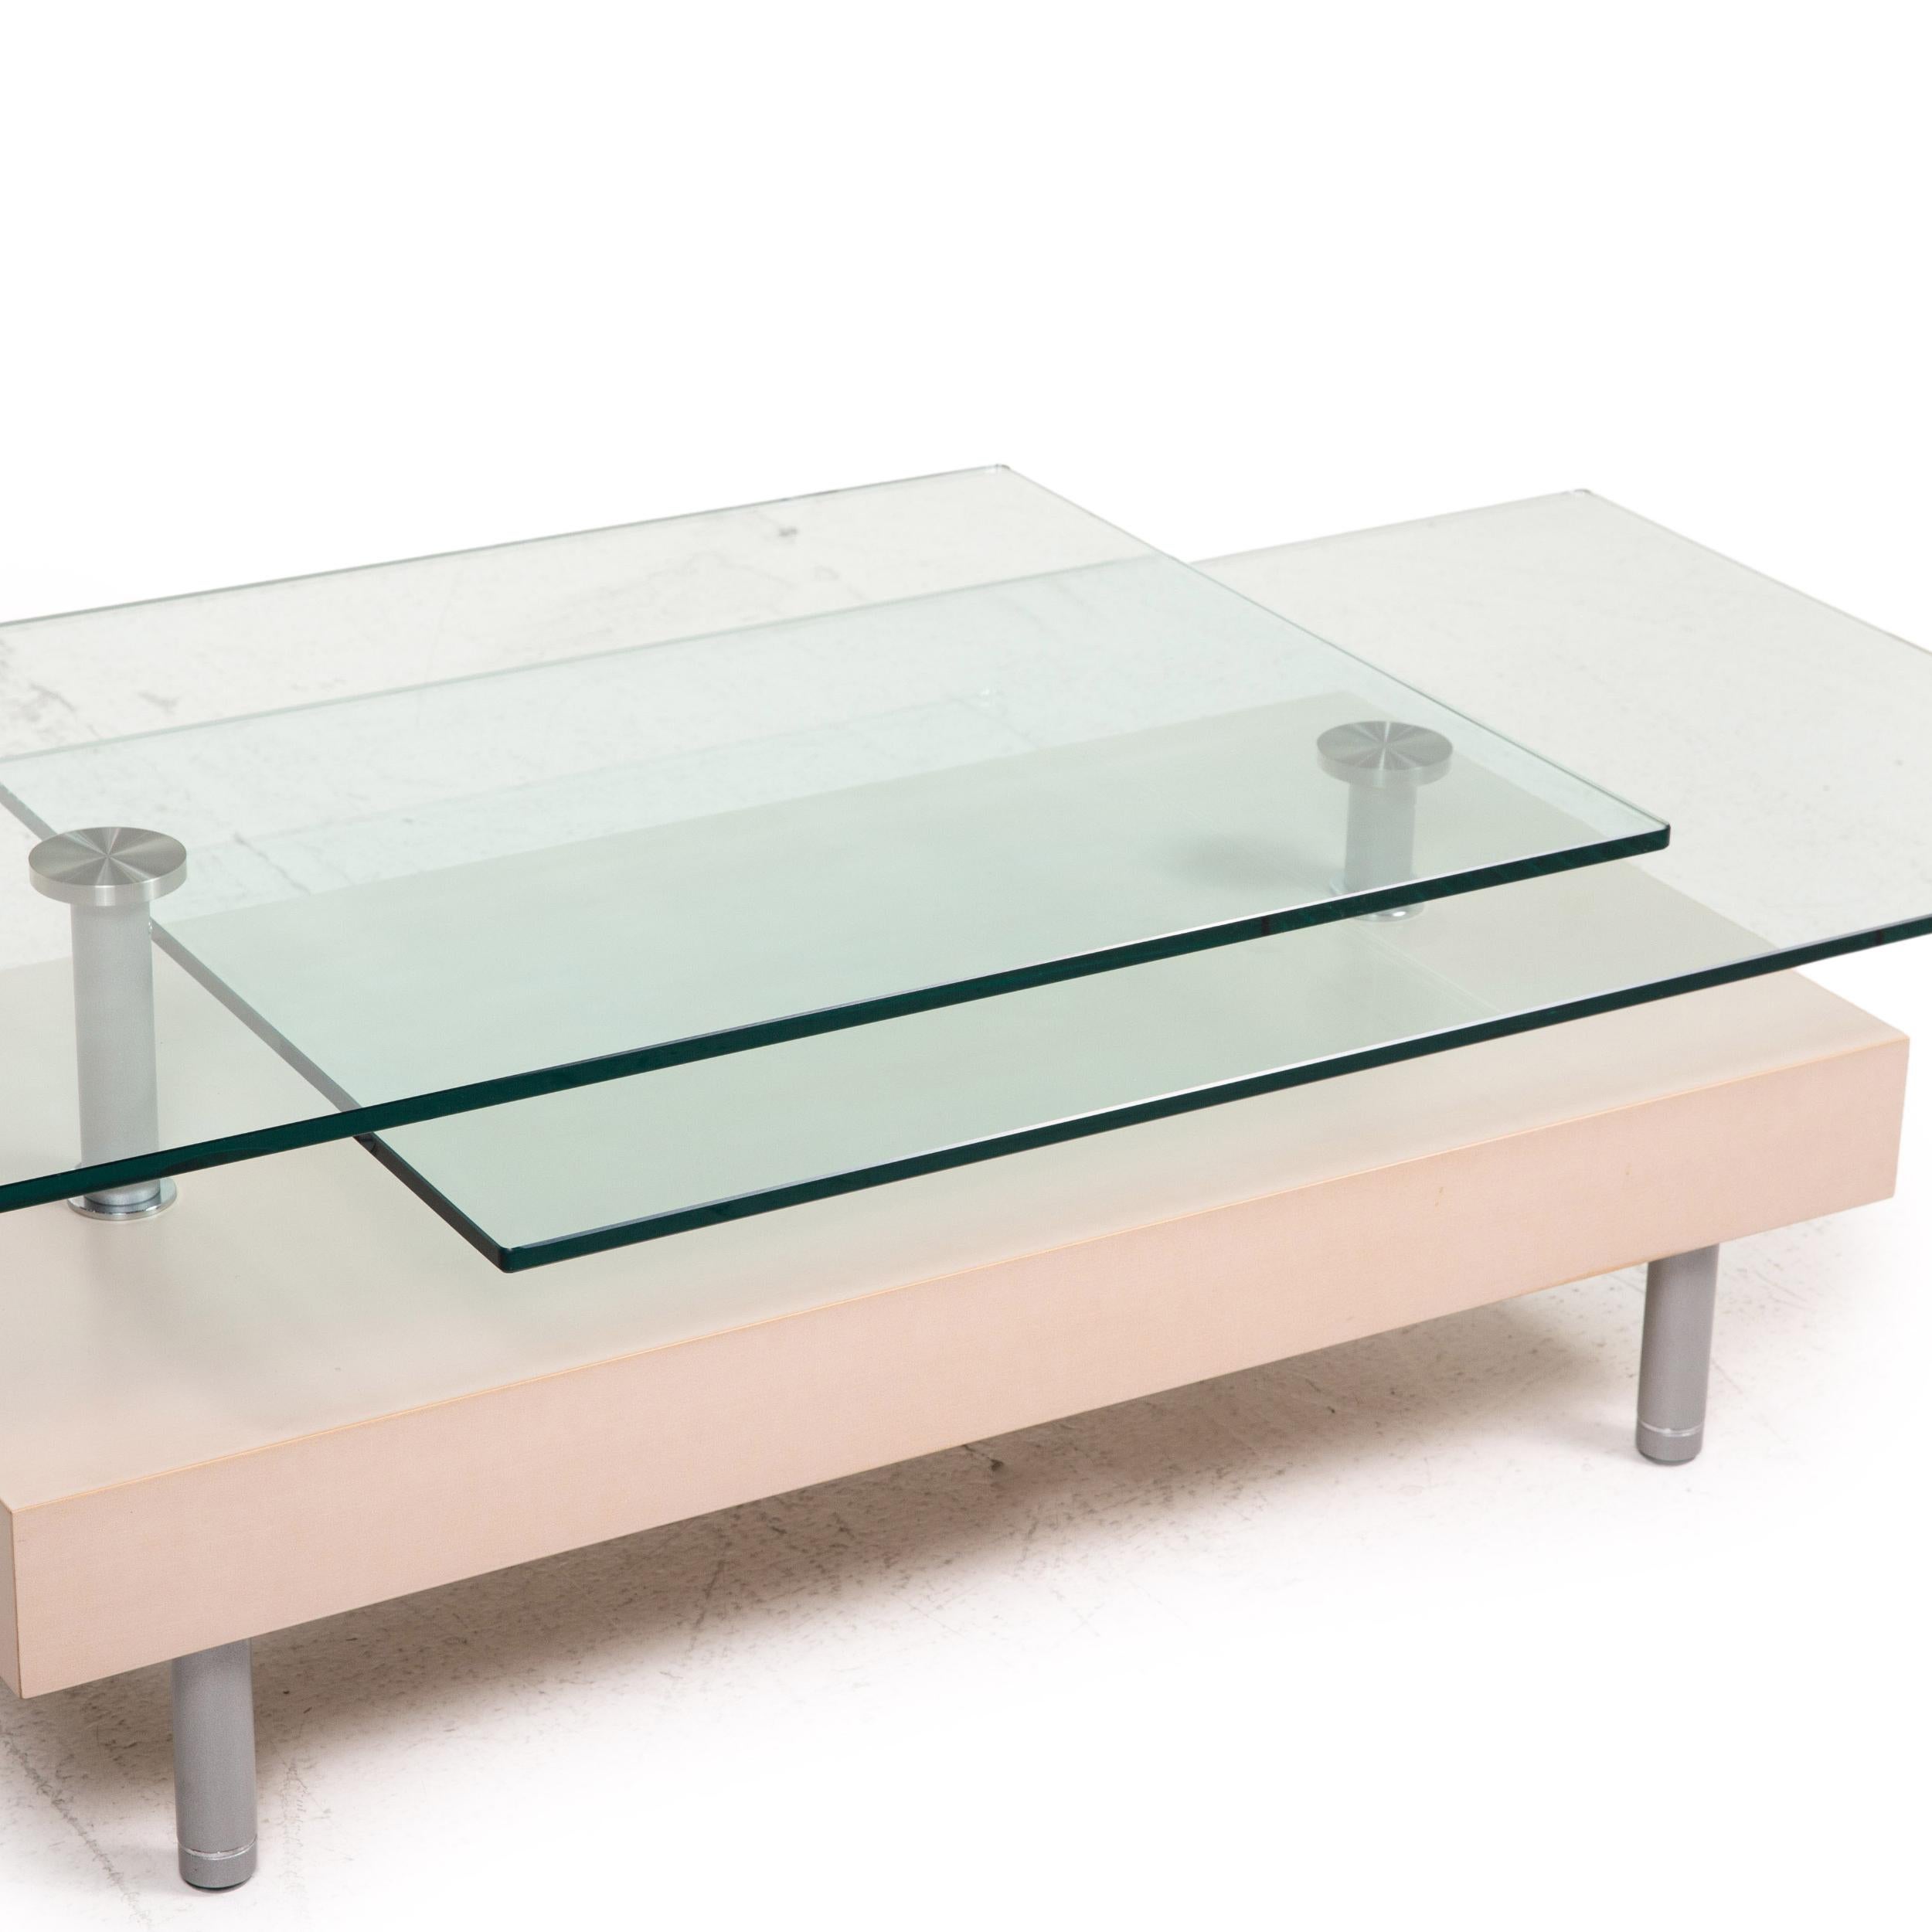 German Rolf Benz Glass Coffee Table Beige Function